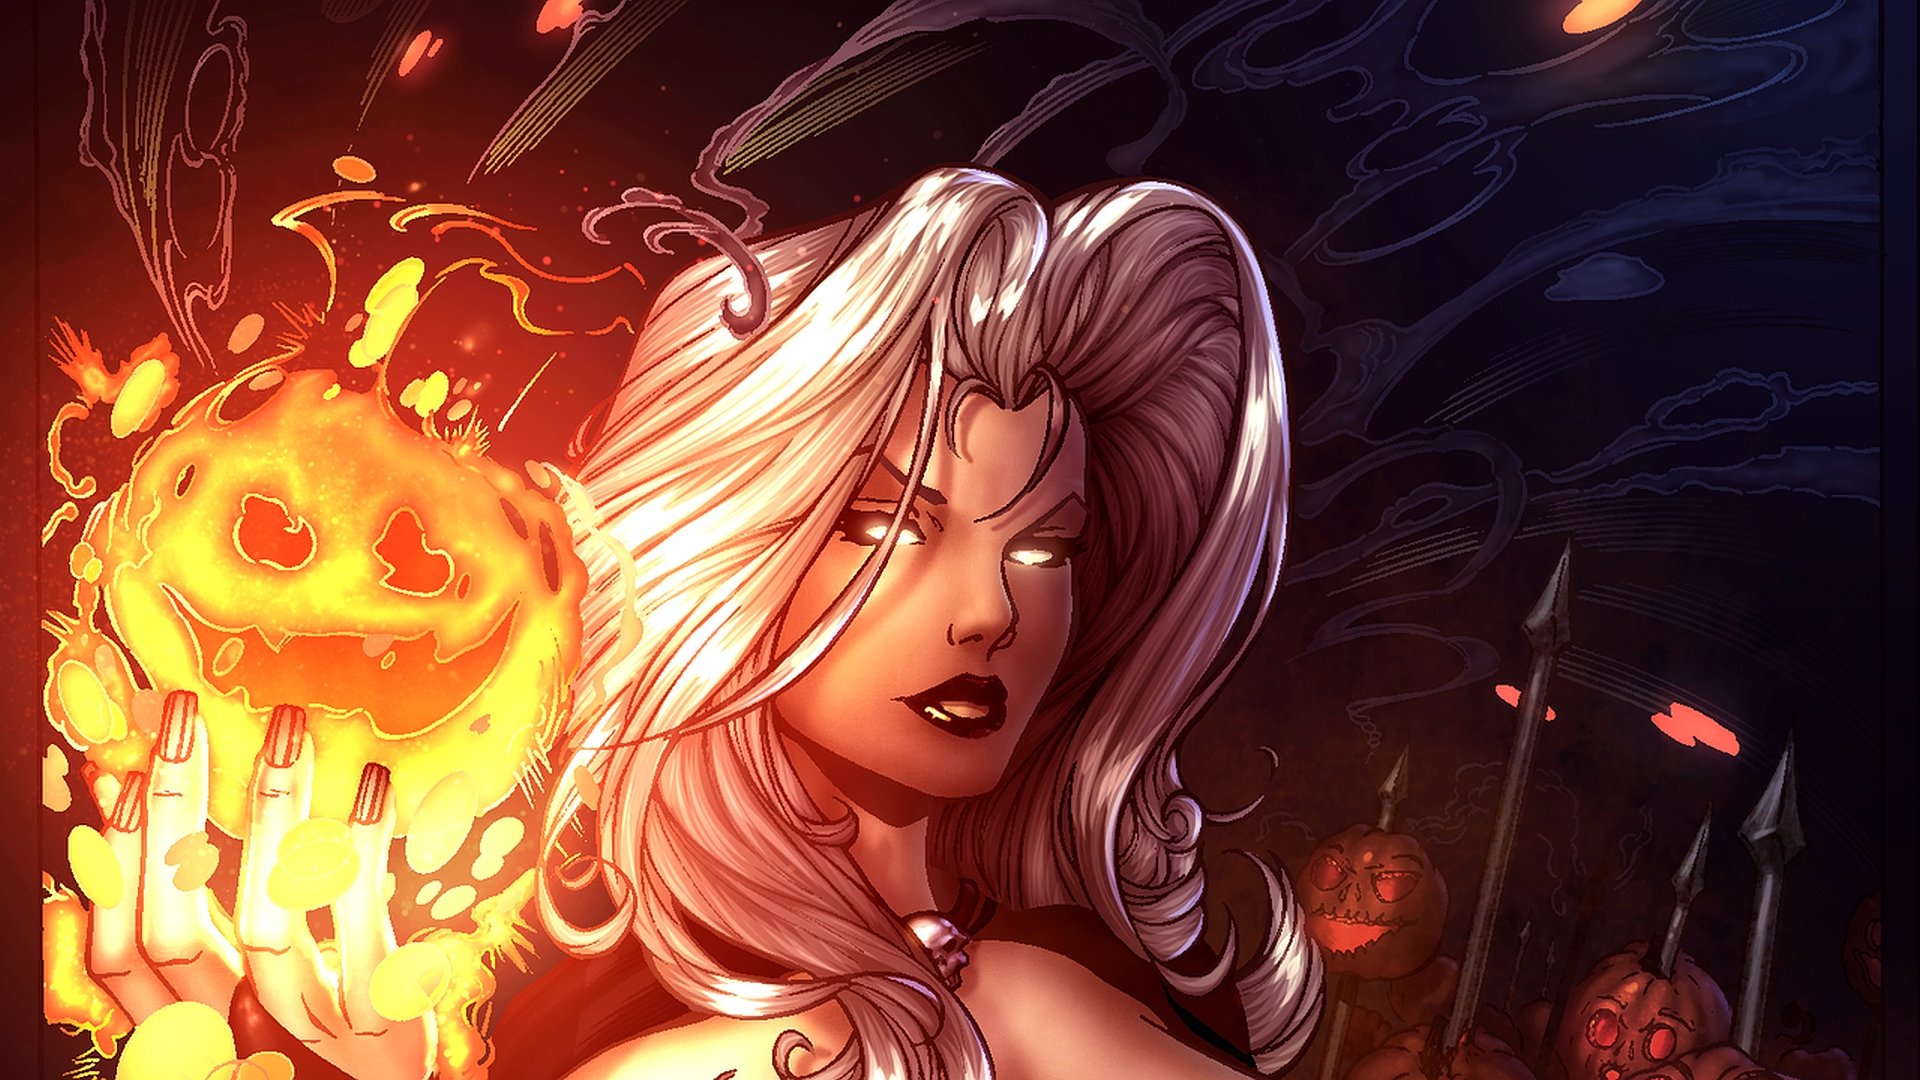 Best Lady Death wallpaper ID:156107 for High Resolution hd 1920x1080 computer